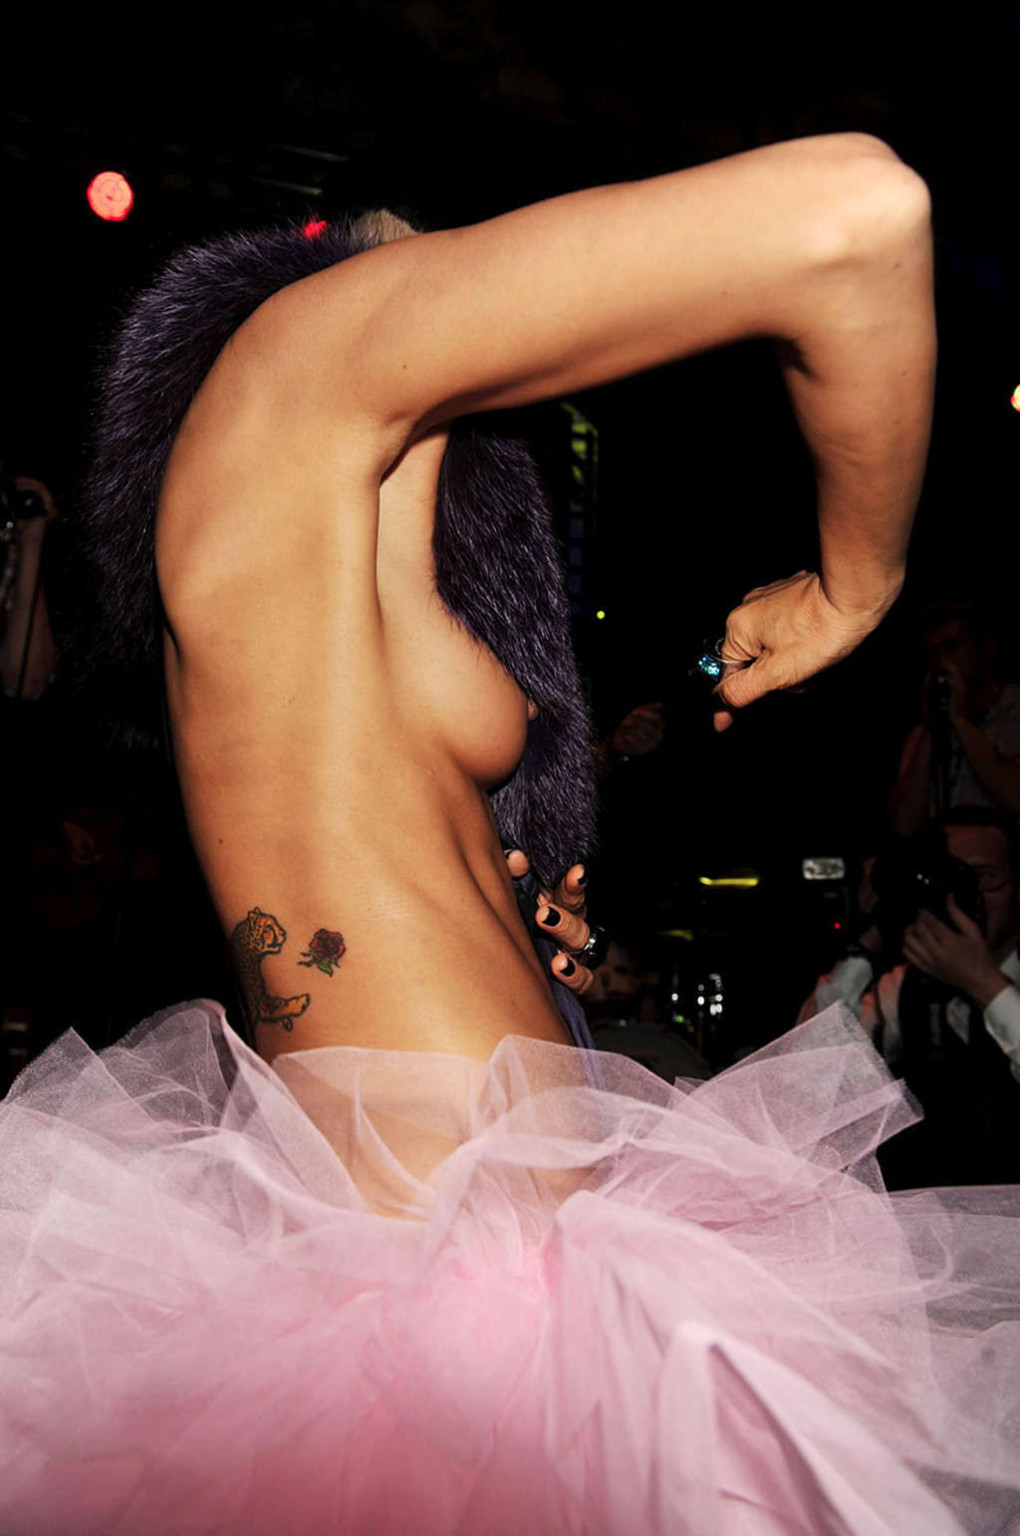 Bai Ling has a nipple slip while she is performing her show #75369740